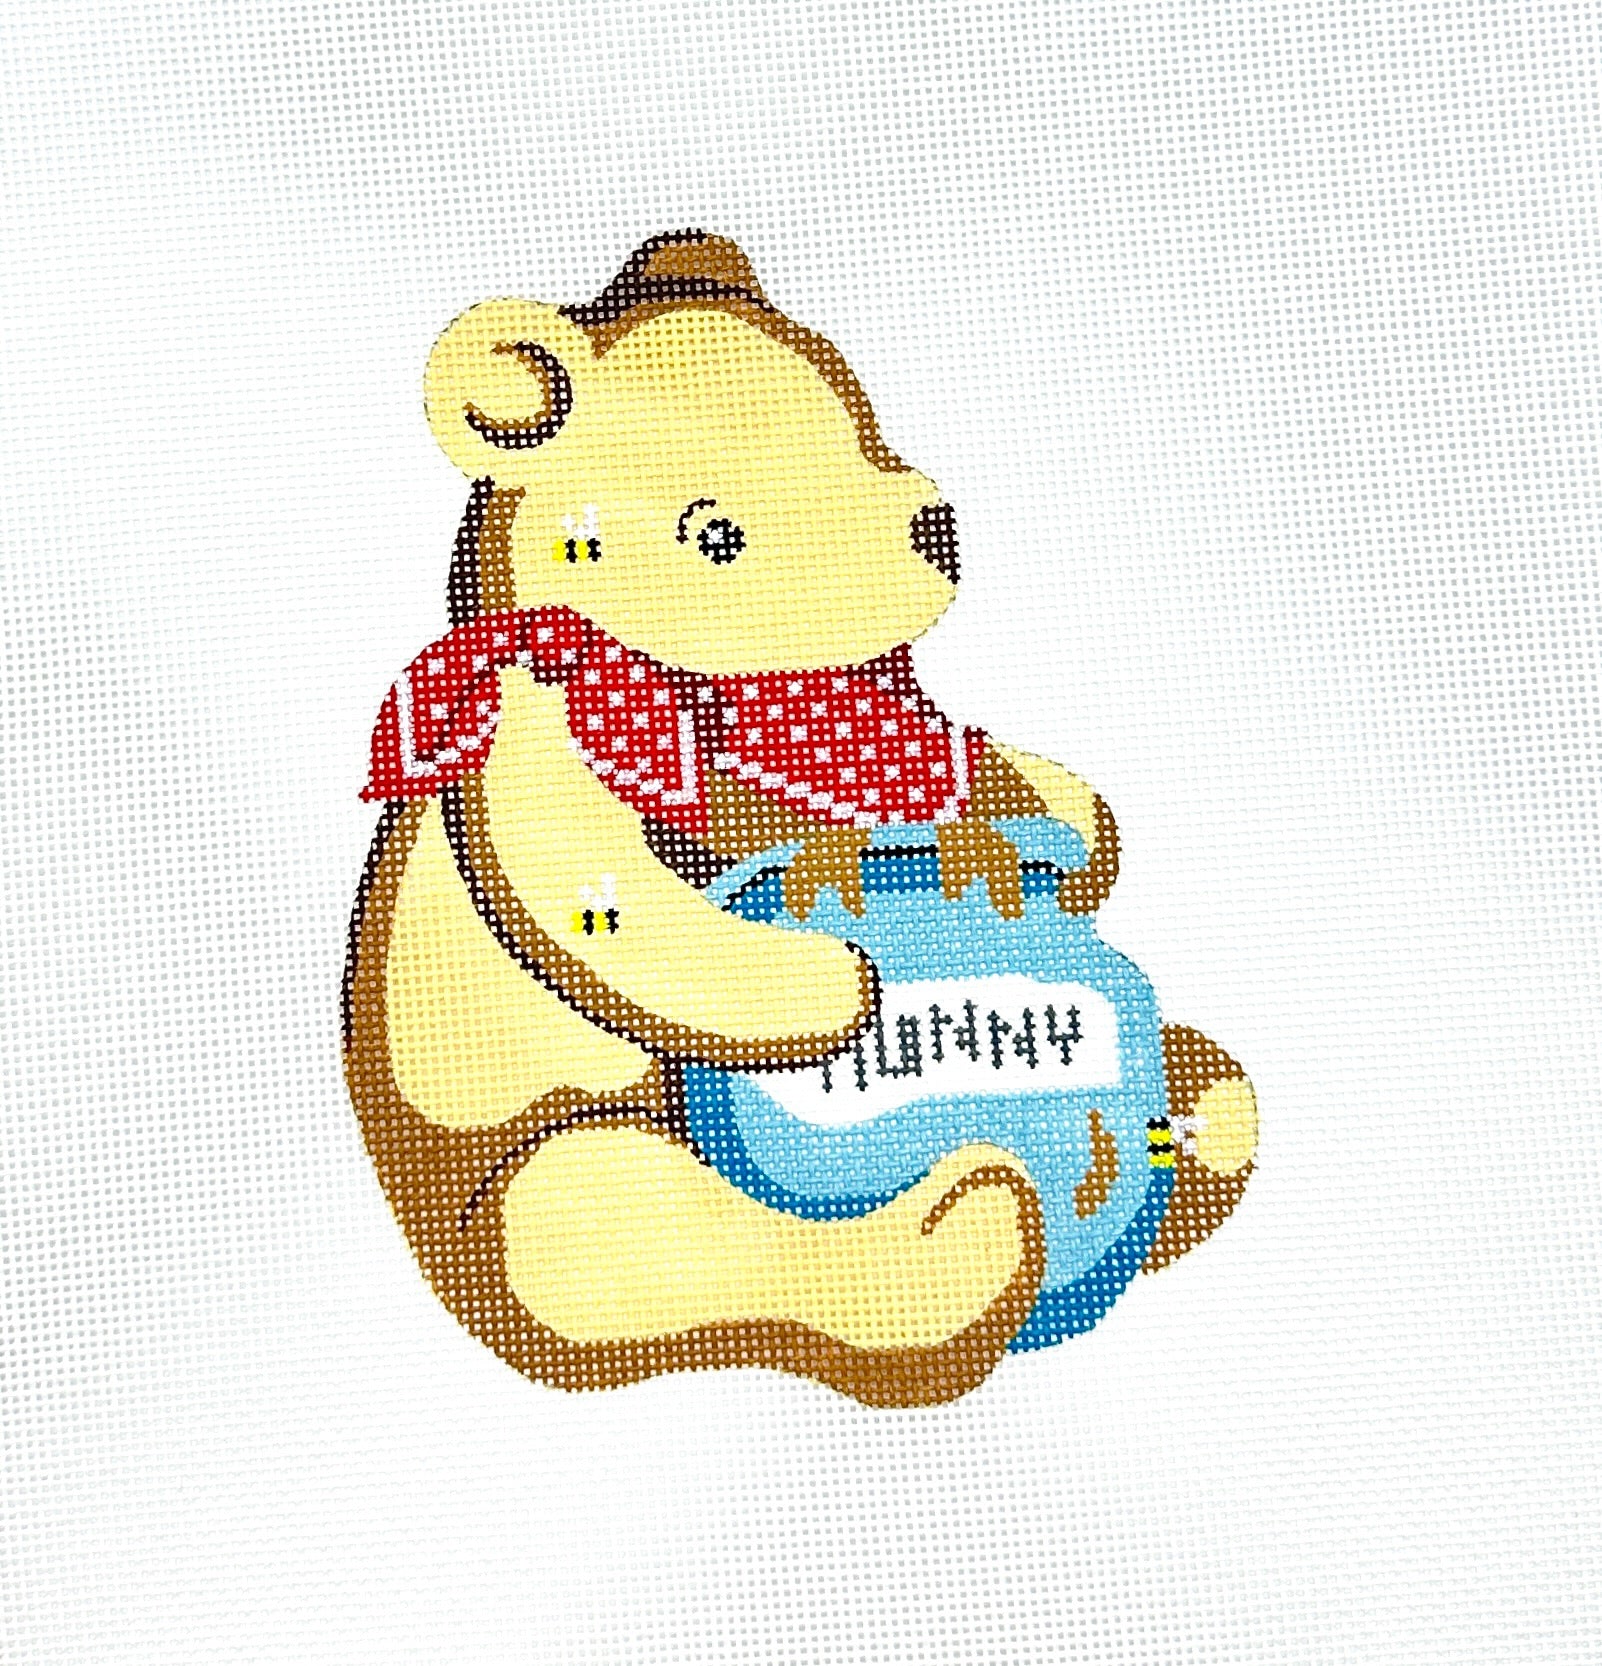 Pooh Bear in the Hunny Pot – The Red Thread Atelier